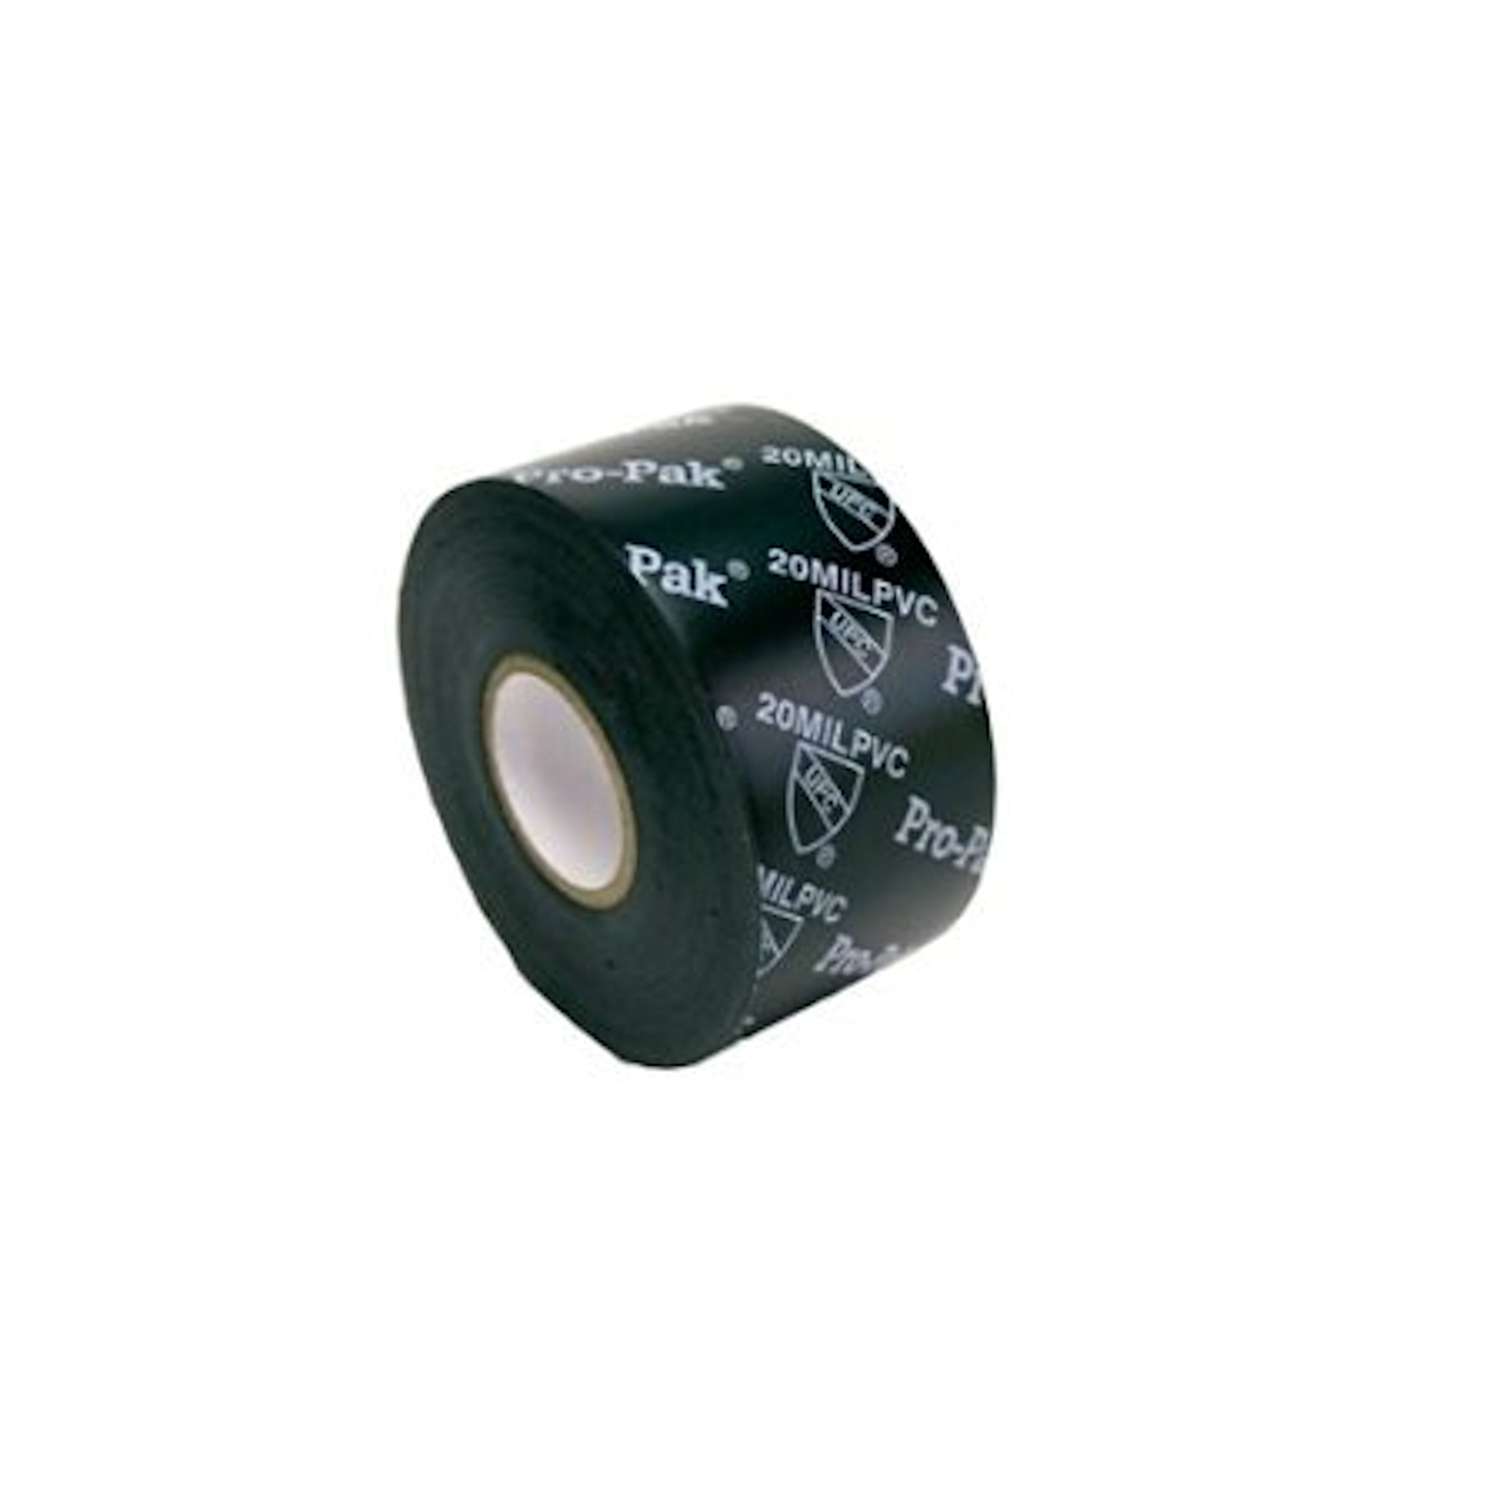 PVC Pipe Wrapping Tape  HVAC Tape Manufacturers Suppliers